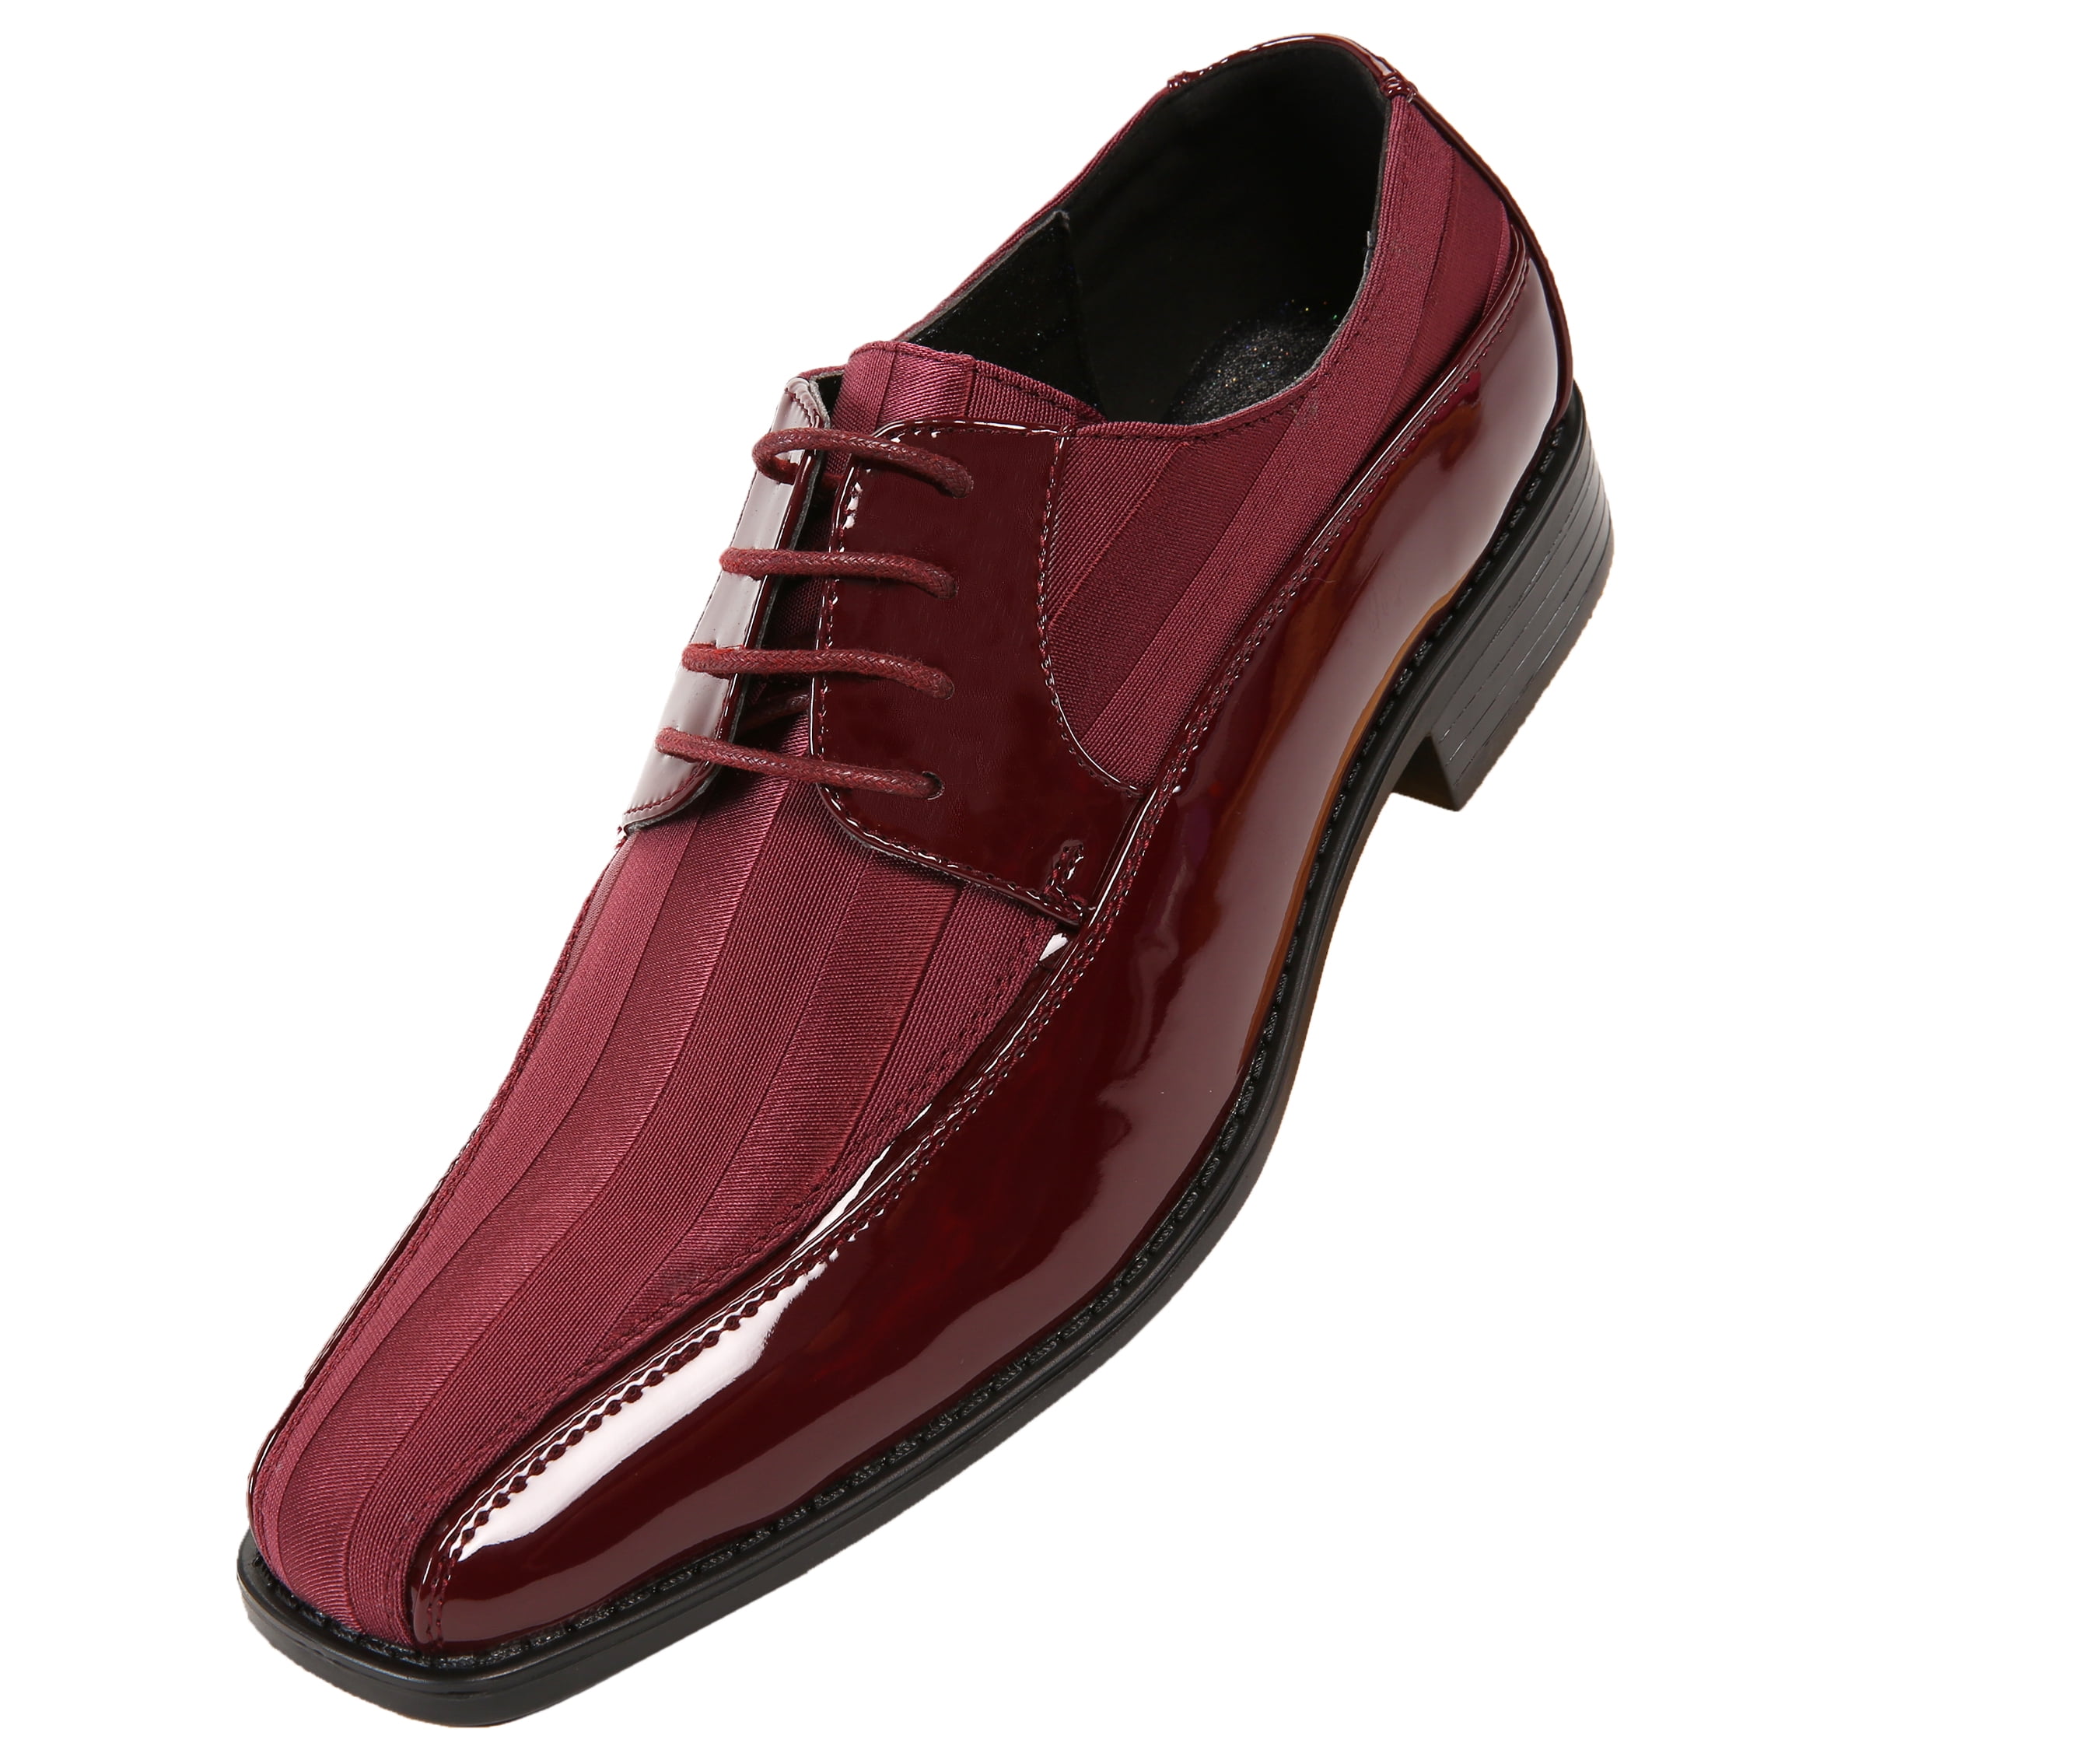 Details about   Mens Dress Formal Business Leisure Shoes Work Oxfords Lace up Flats Office New L